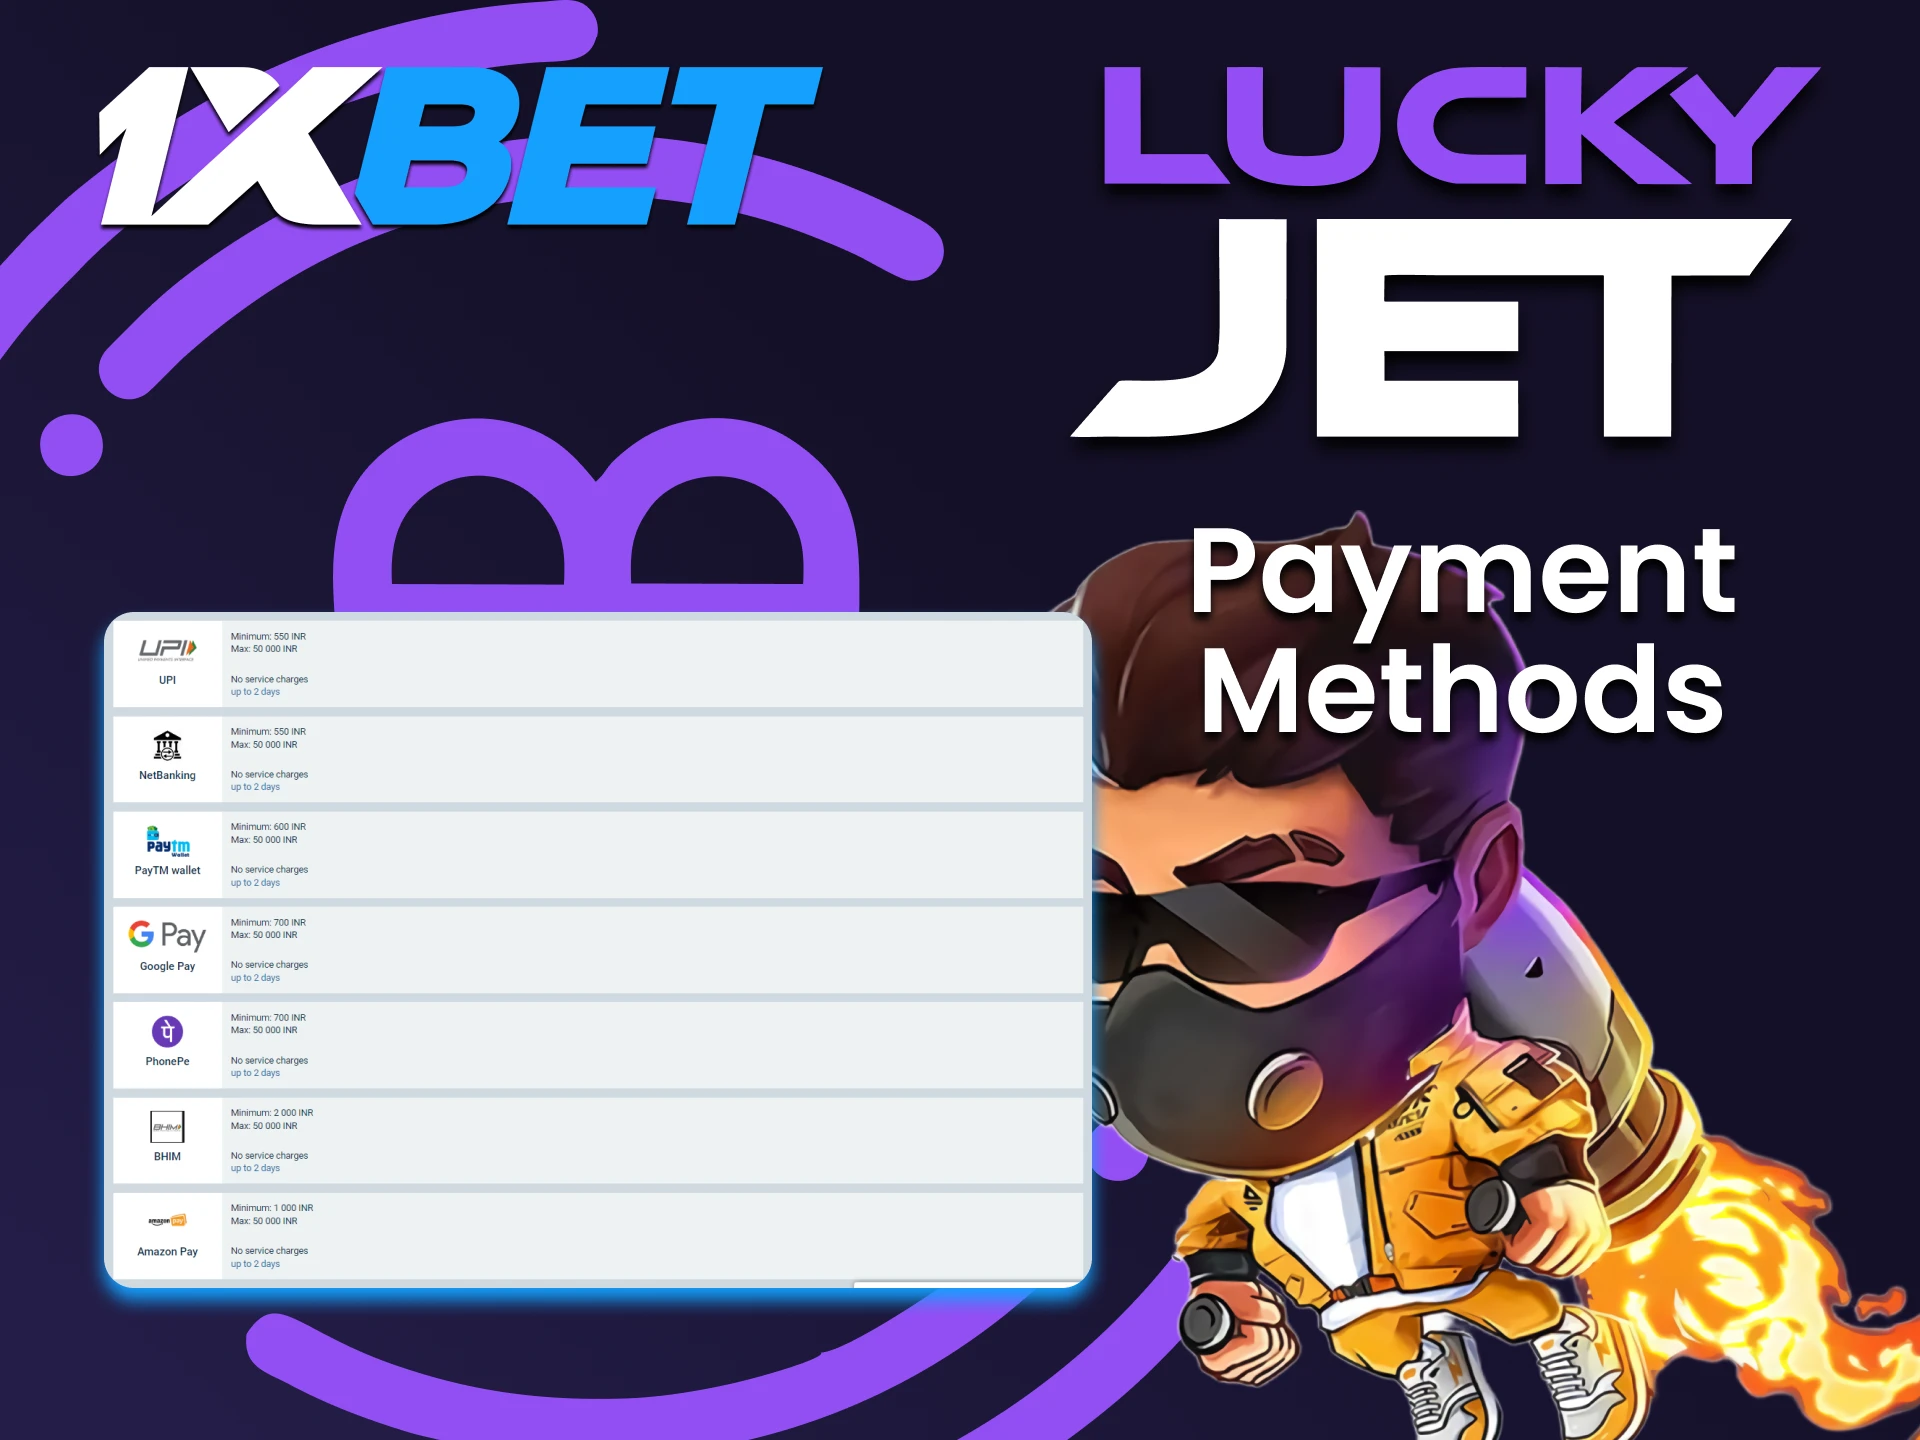 Choose the provided method of transferring funds to play Lucky Jet from 1xbet.